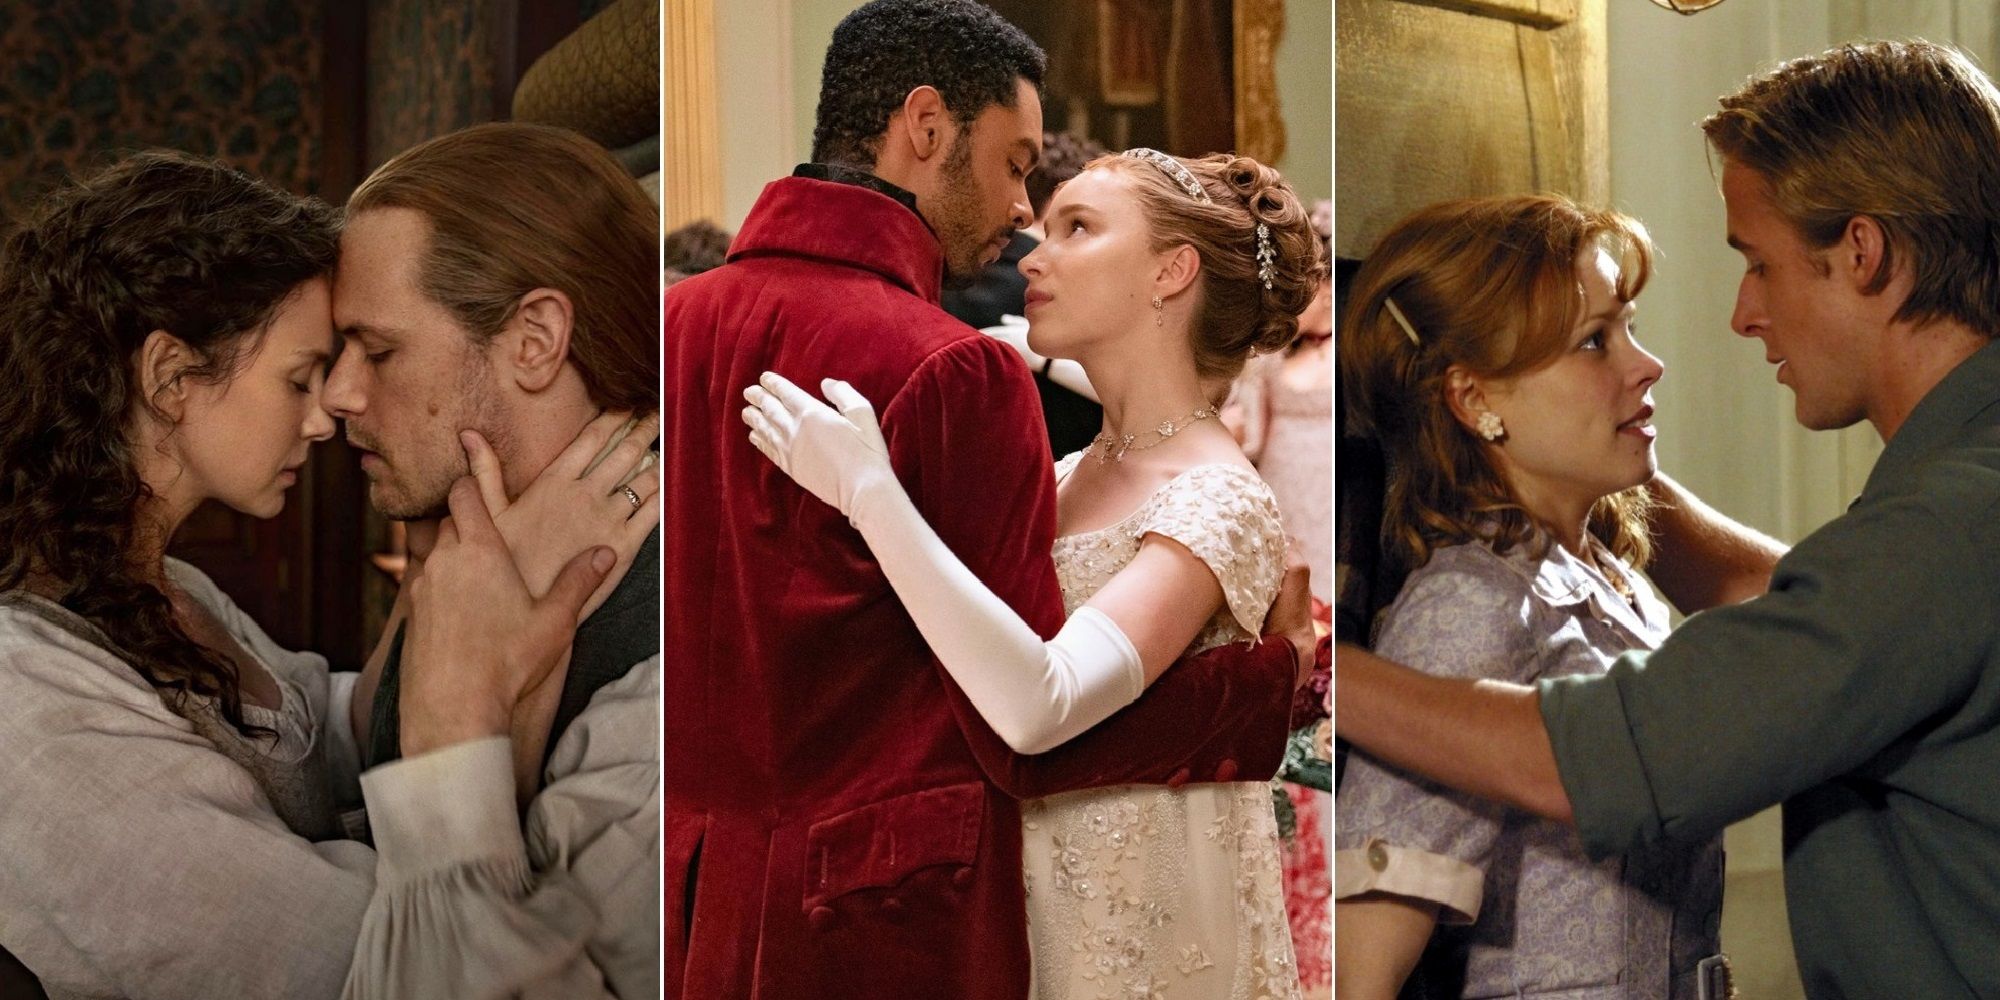 Romcom Couples Split Image Outlander's Jamie and Claire, Birdgerton's Simon and Daphne, and The Notebook's Noah and Allie